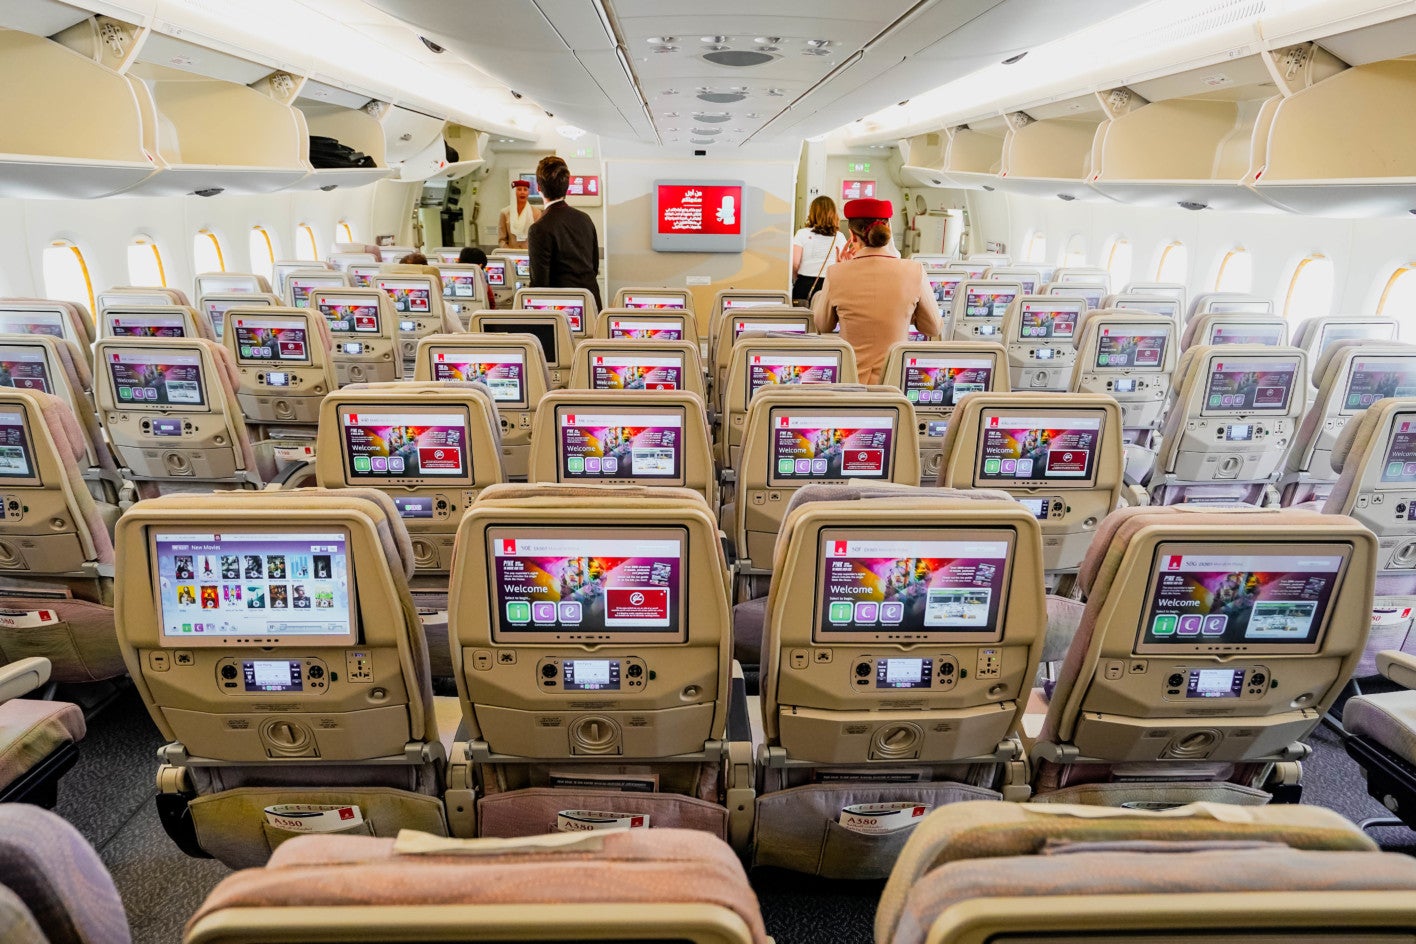 Emirates' Inaugural World's Shortest A380 Flight Review [Business]